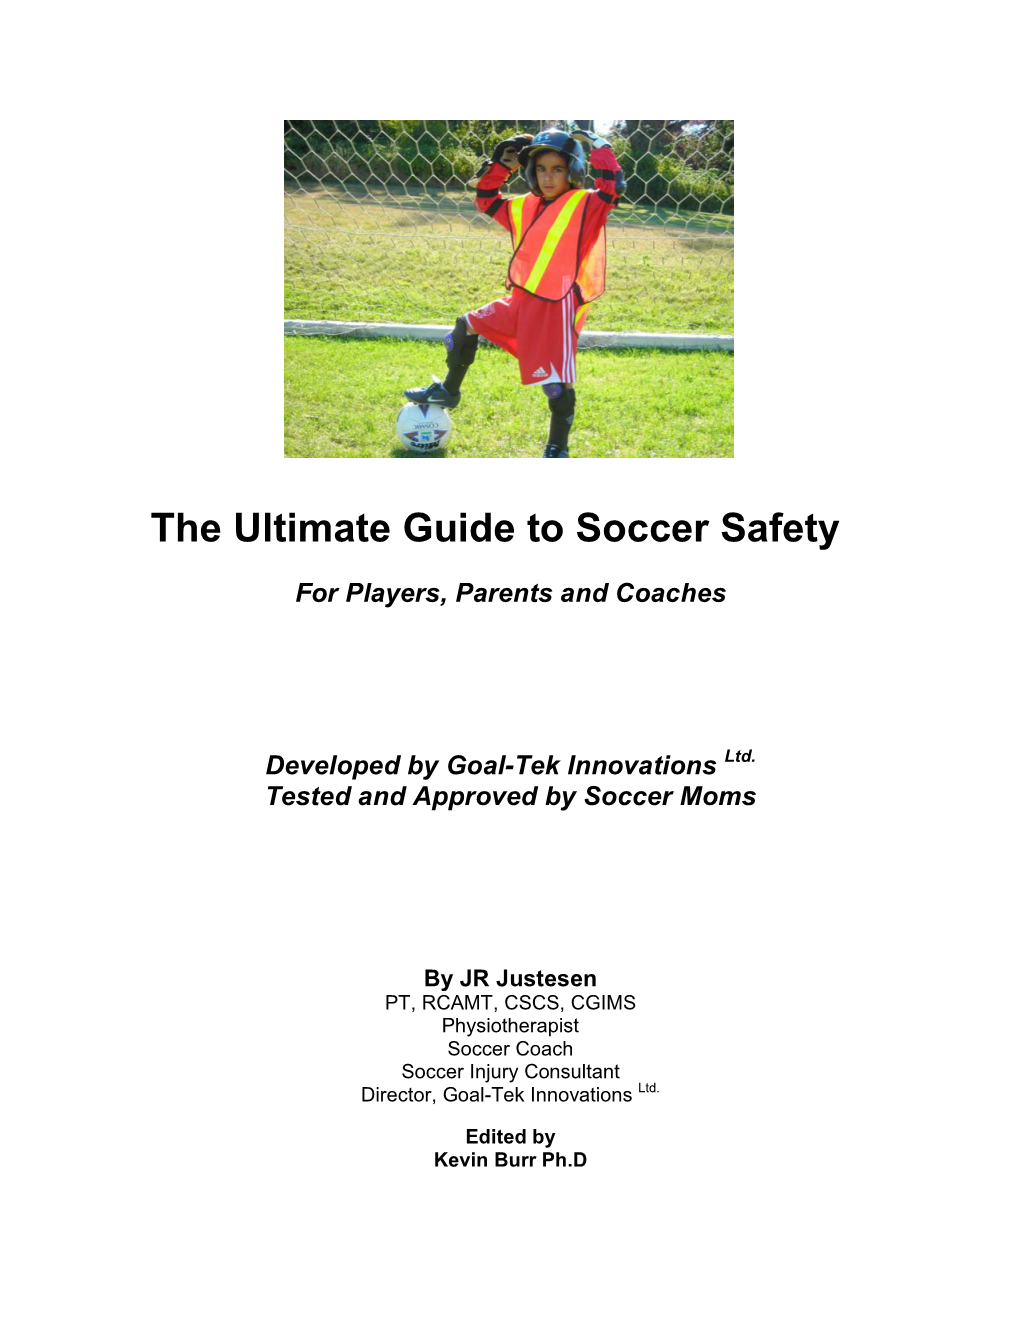 The Ultimate Guide to Soccer Safety